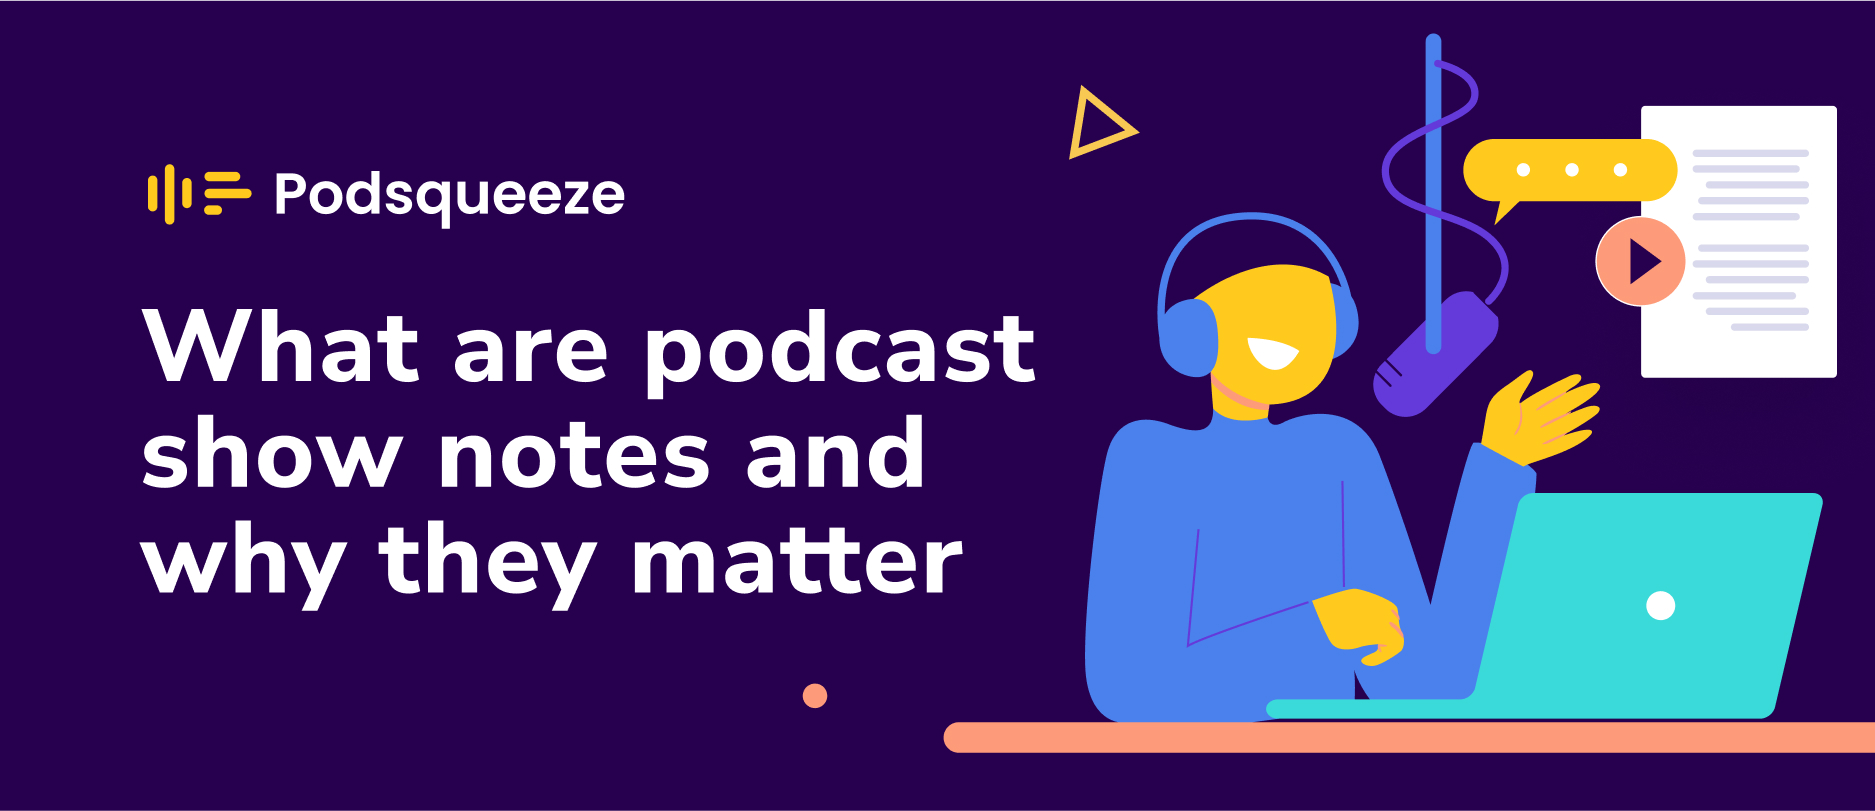 Podcast shownotes